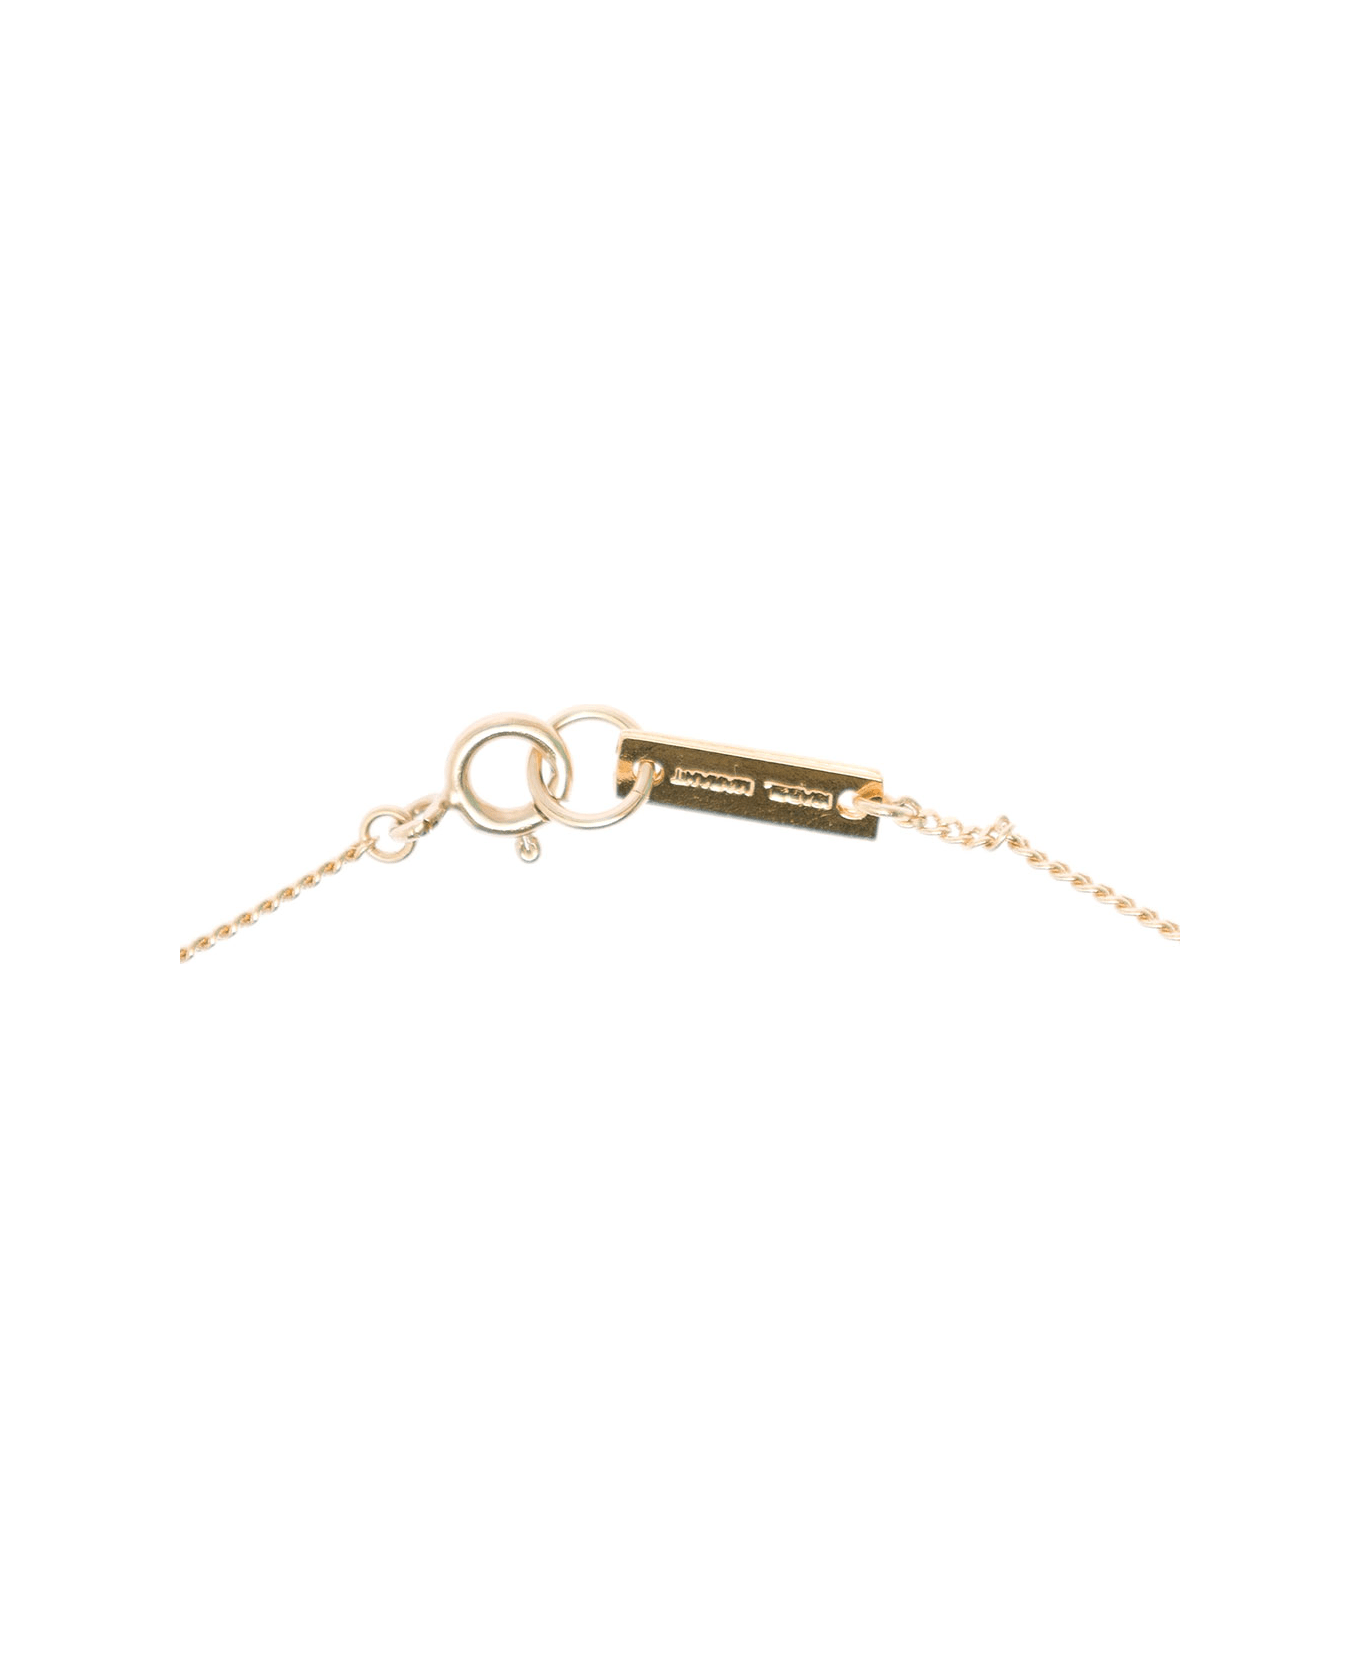 Isabel Marant Woman's Gold Metal Necklace And Horn Pendant And Crystal - Metallic